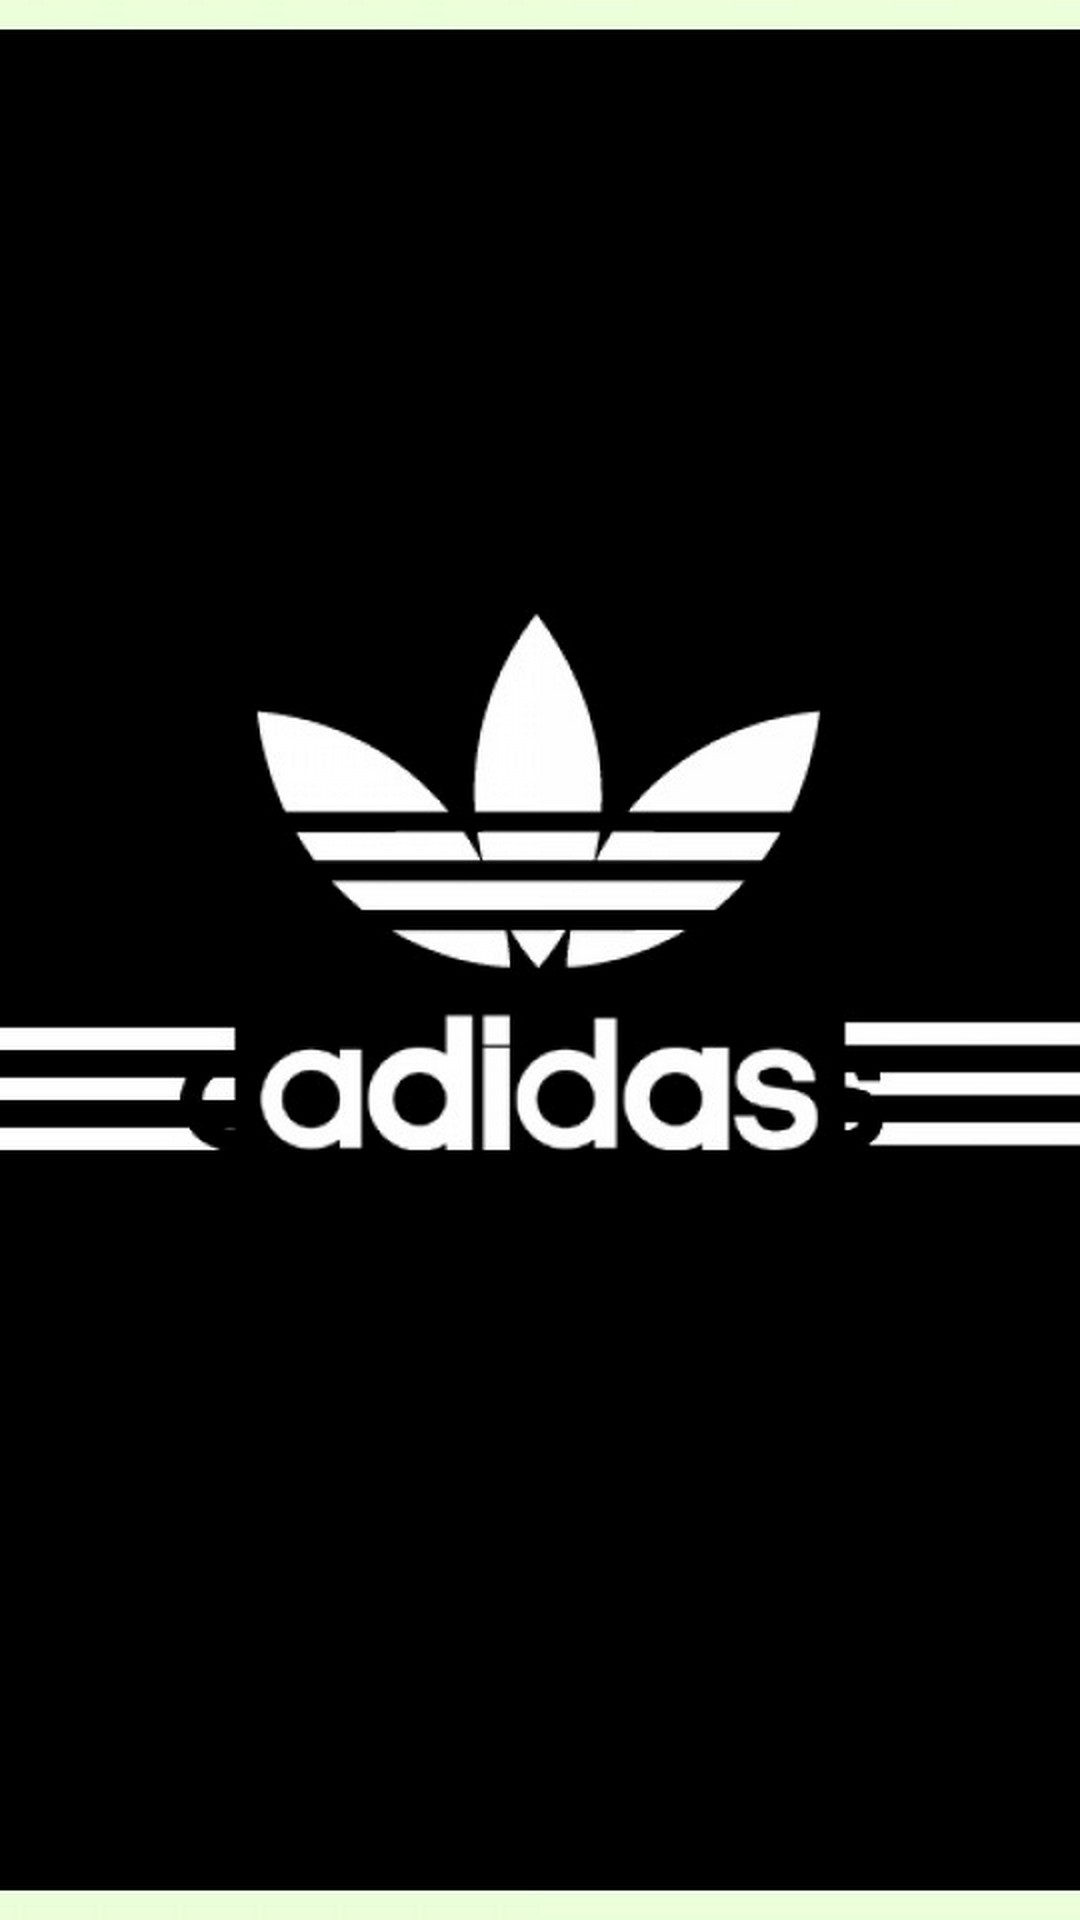 Adidas iPhone 7 Wallpaper HD with high-resolution 1080x1920 pixel. Download all Mobile Wallpapers and Use them as wallpapers for your iPhone, Tablet, iPad, Android and other mobile devices